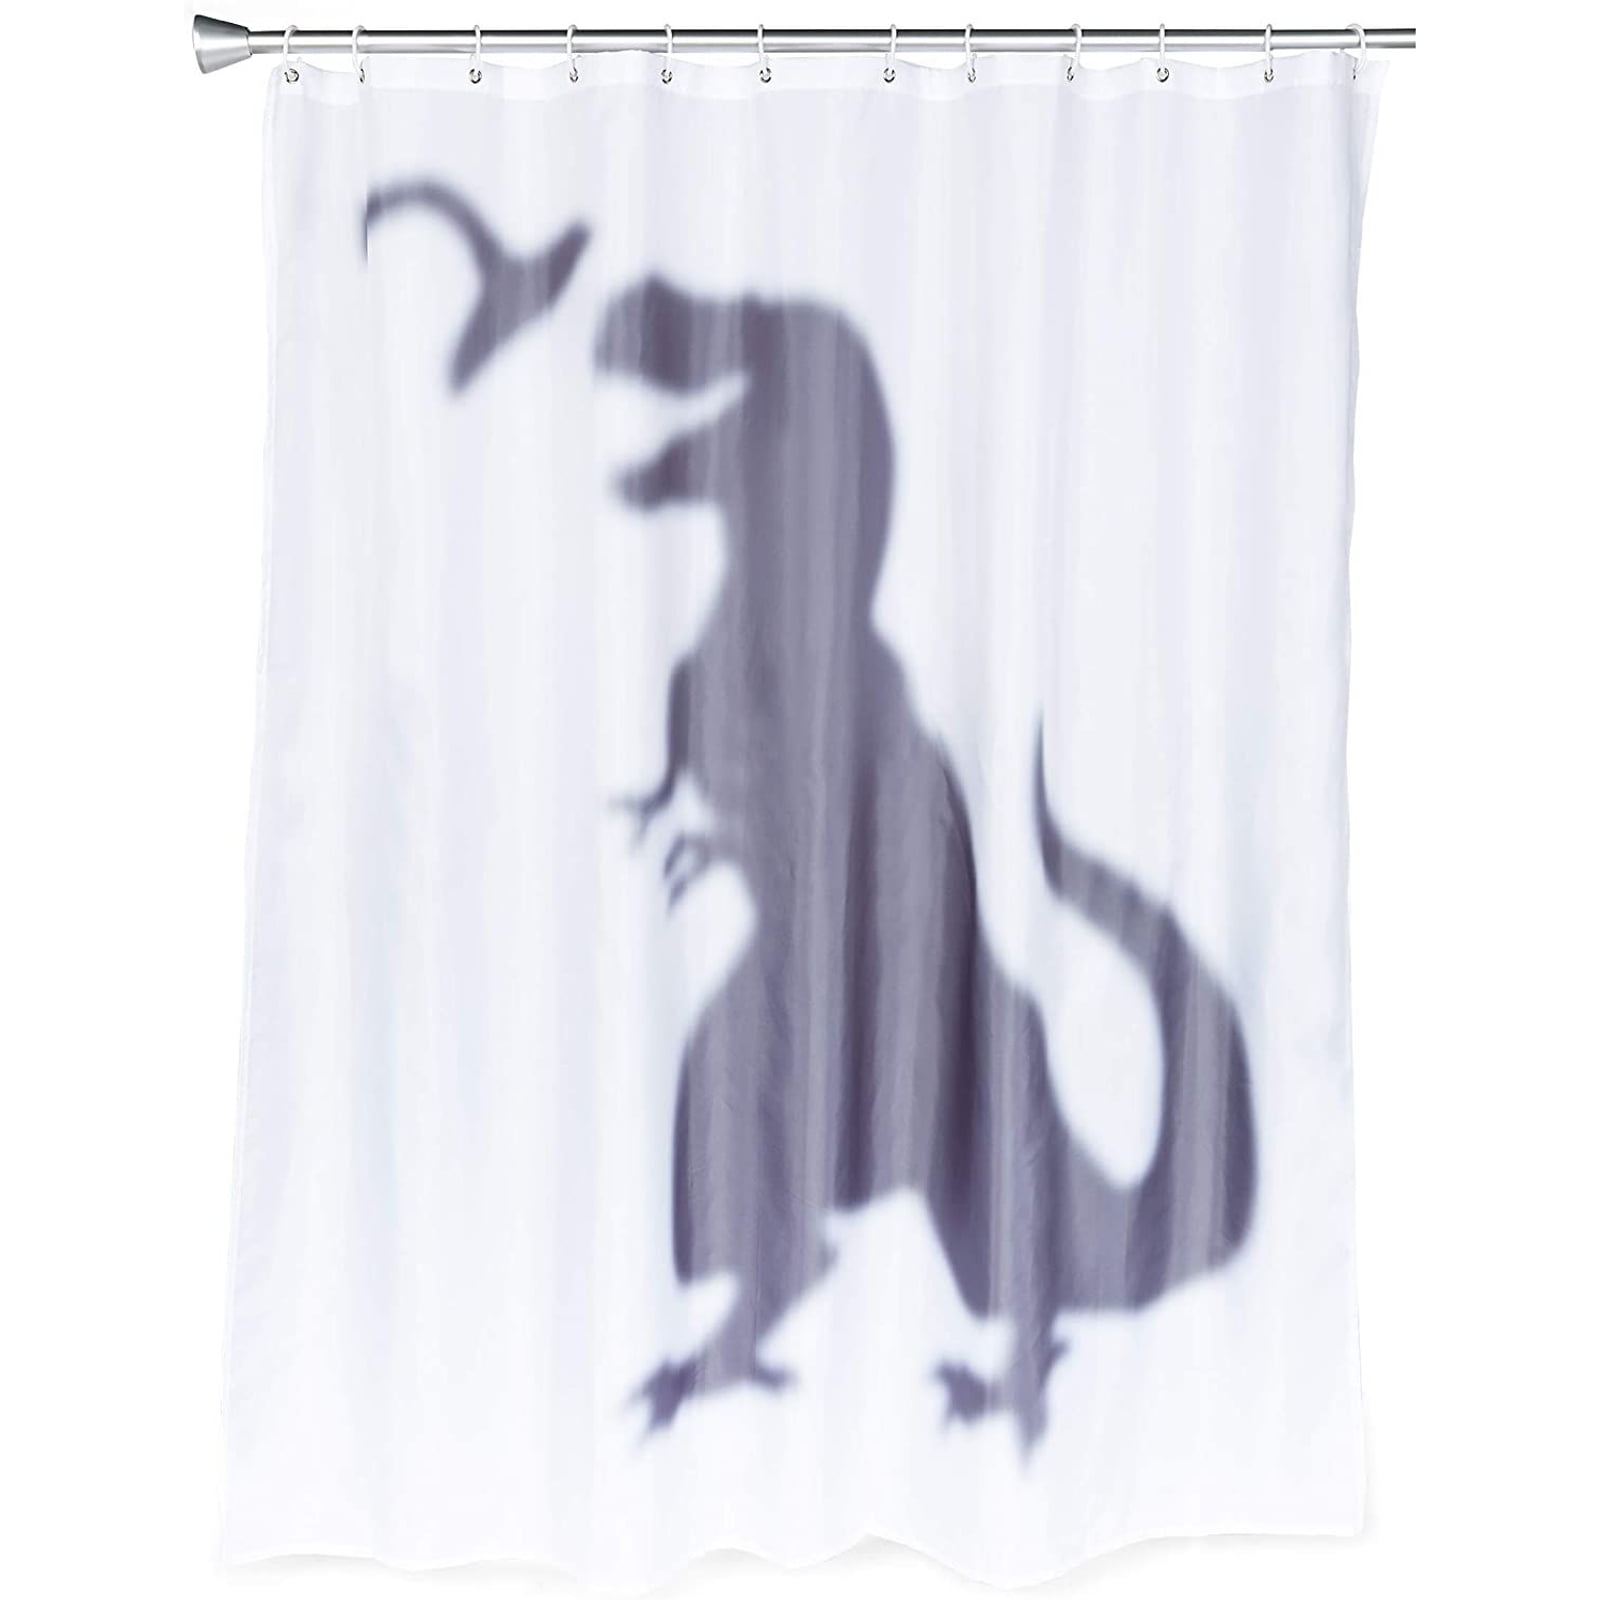 Abstract colored unicorn Shower Curtain Bathroom Decor Fabric & 12hooks 71*71in 